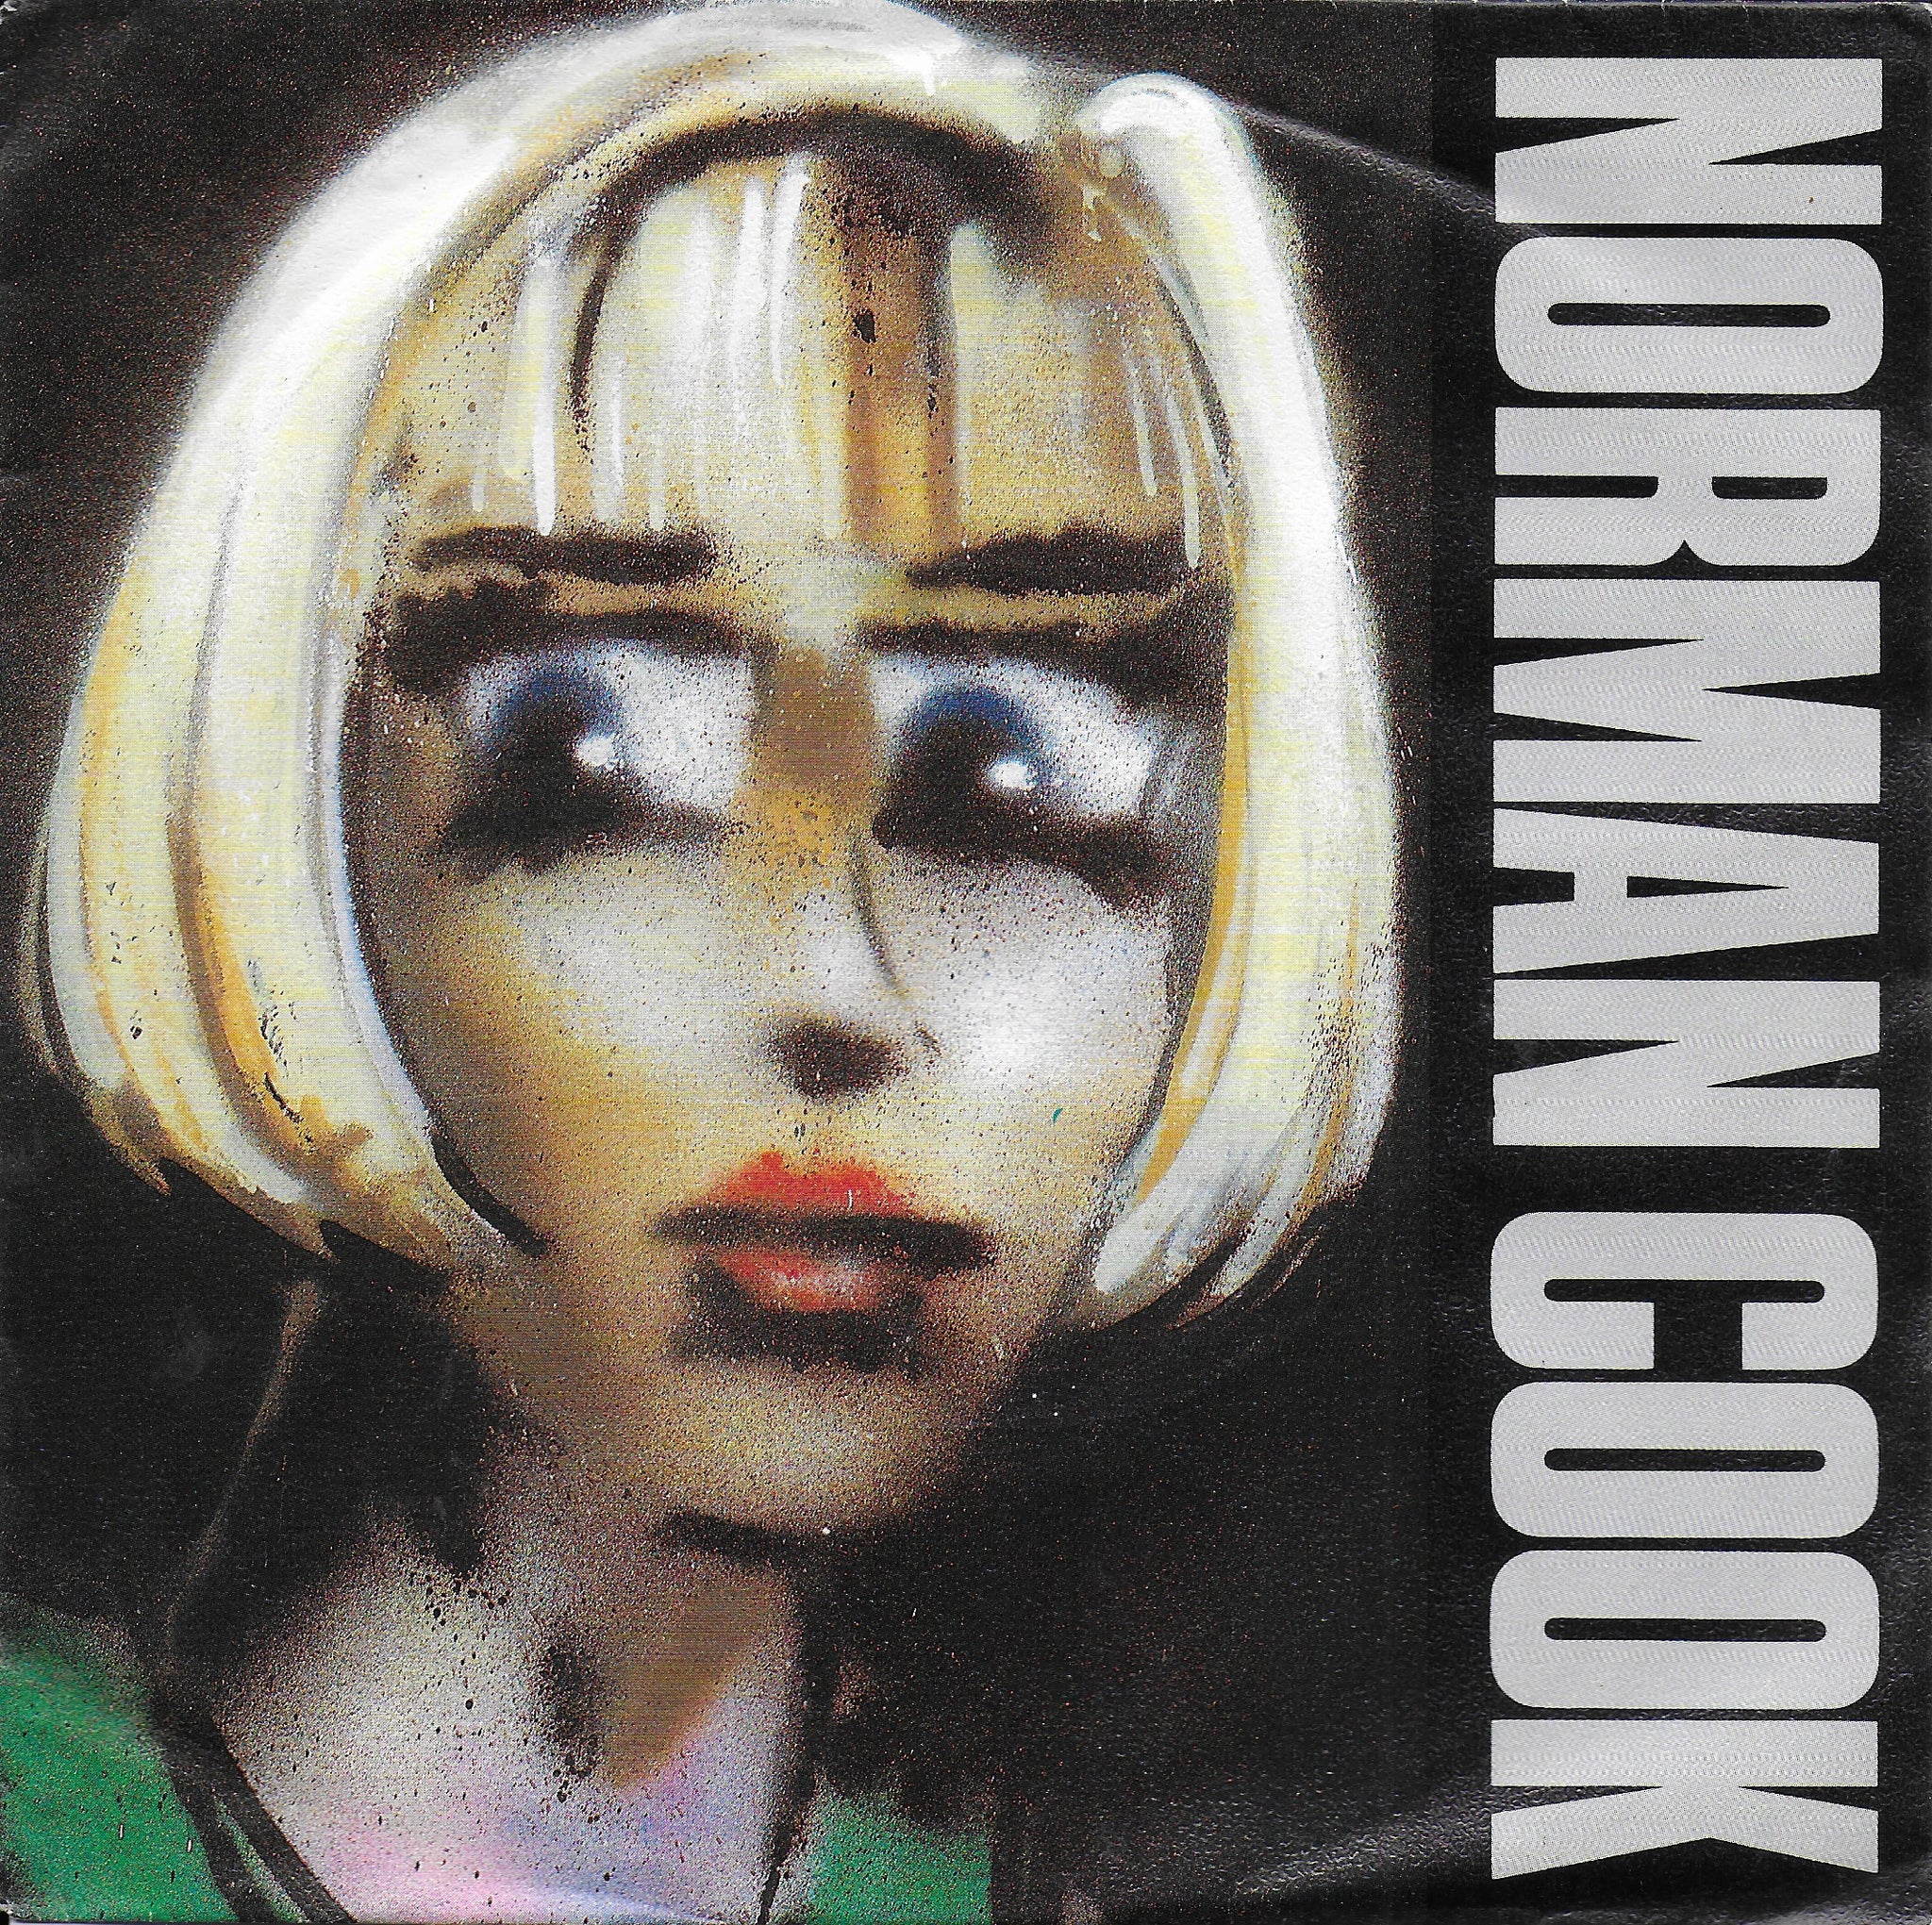 Norman Cook - Won't talk about it